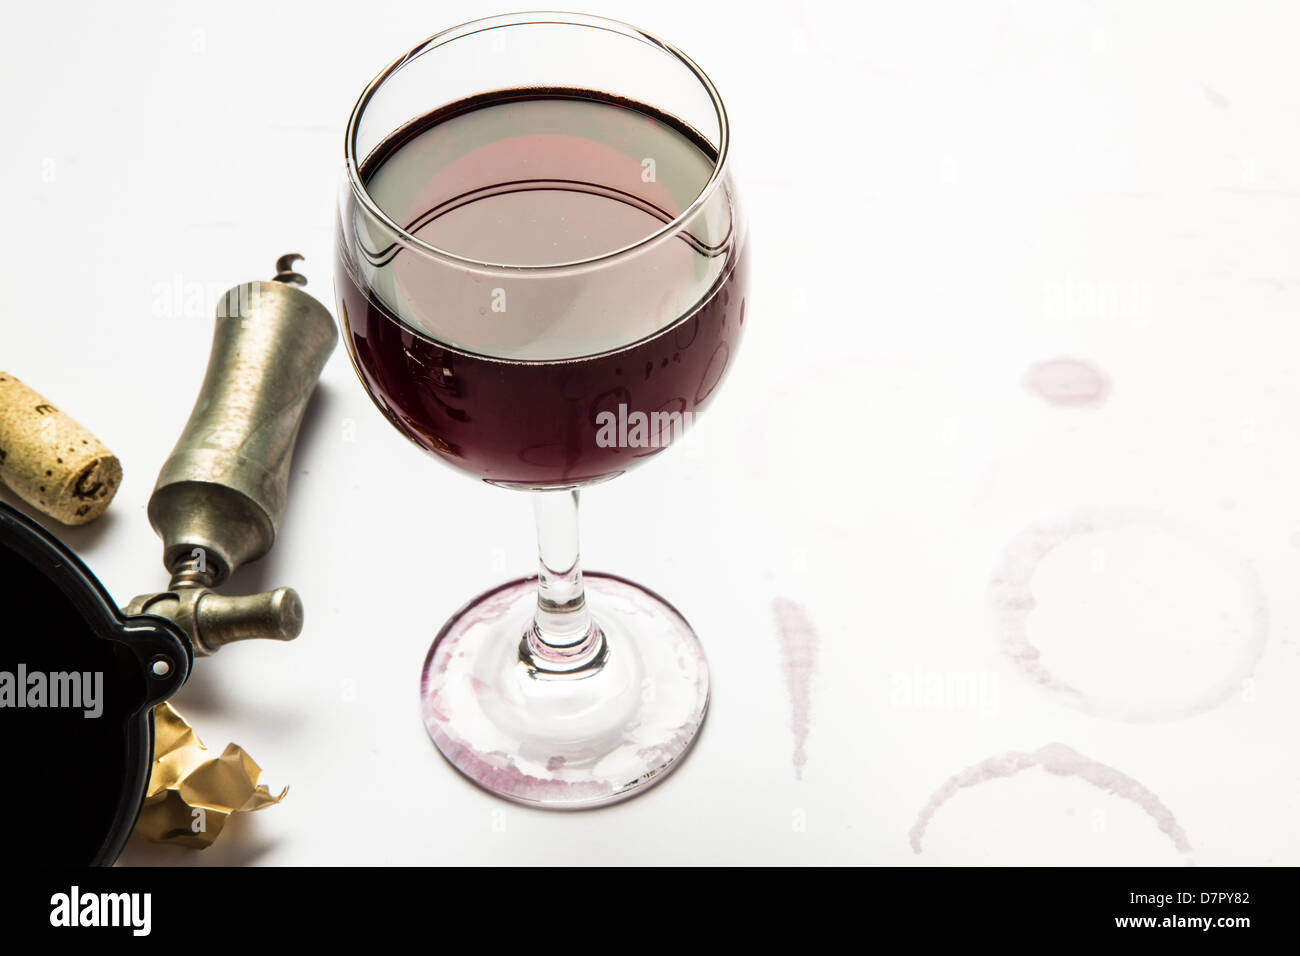 A full glass of red wine with wrapper, cork, and cork screw with wine ring stains from the glass. Stock Photo